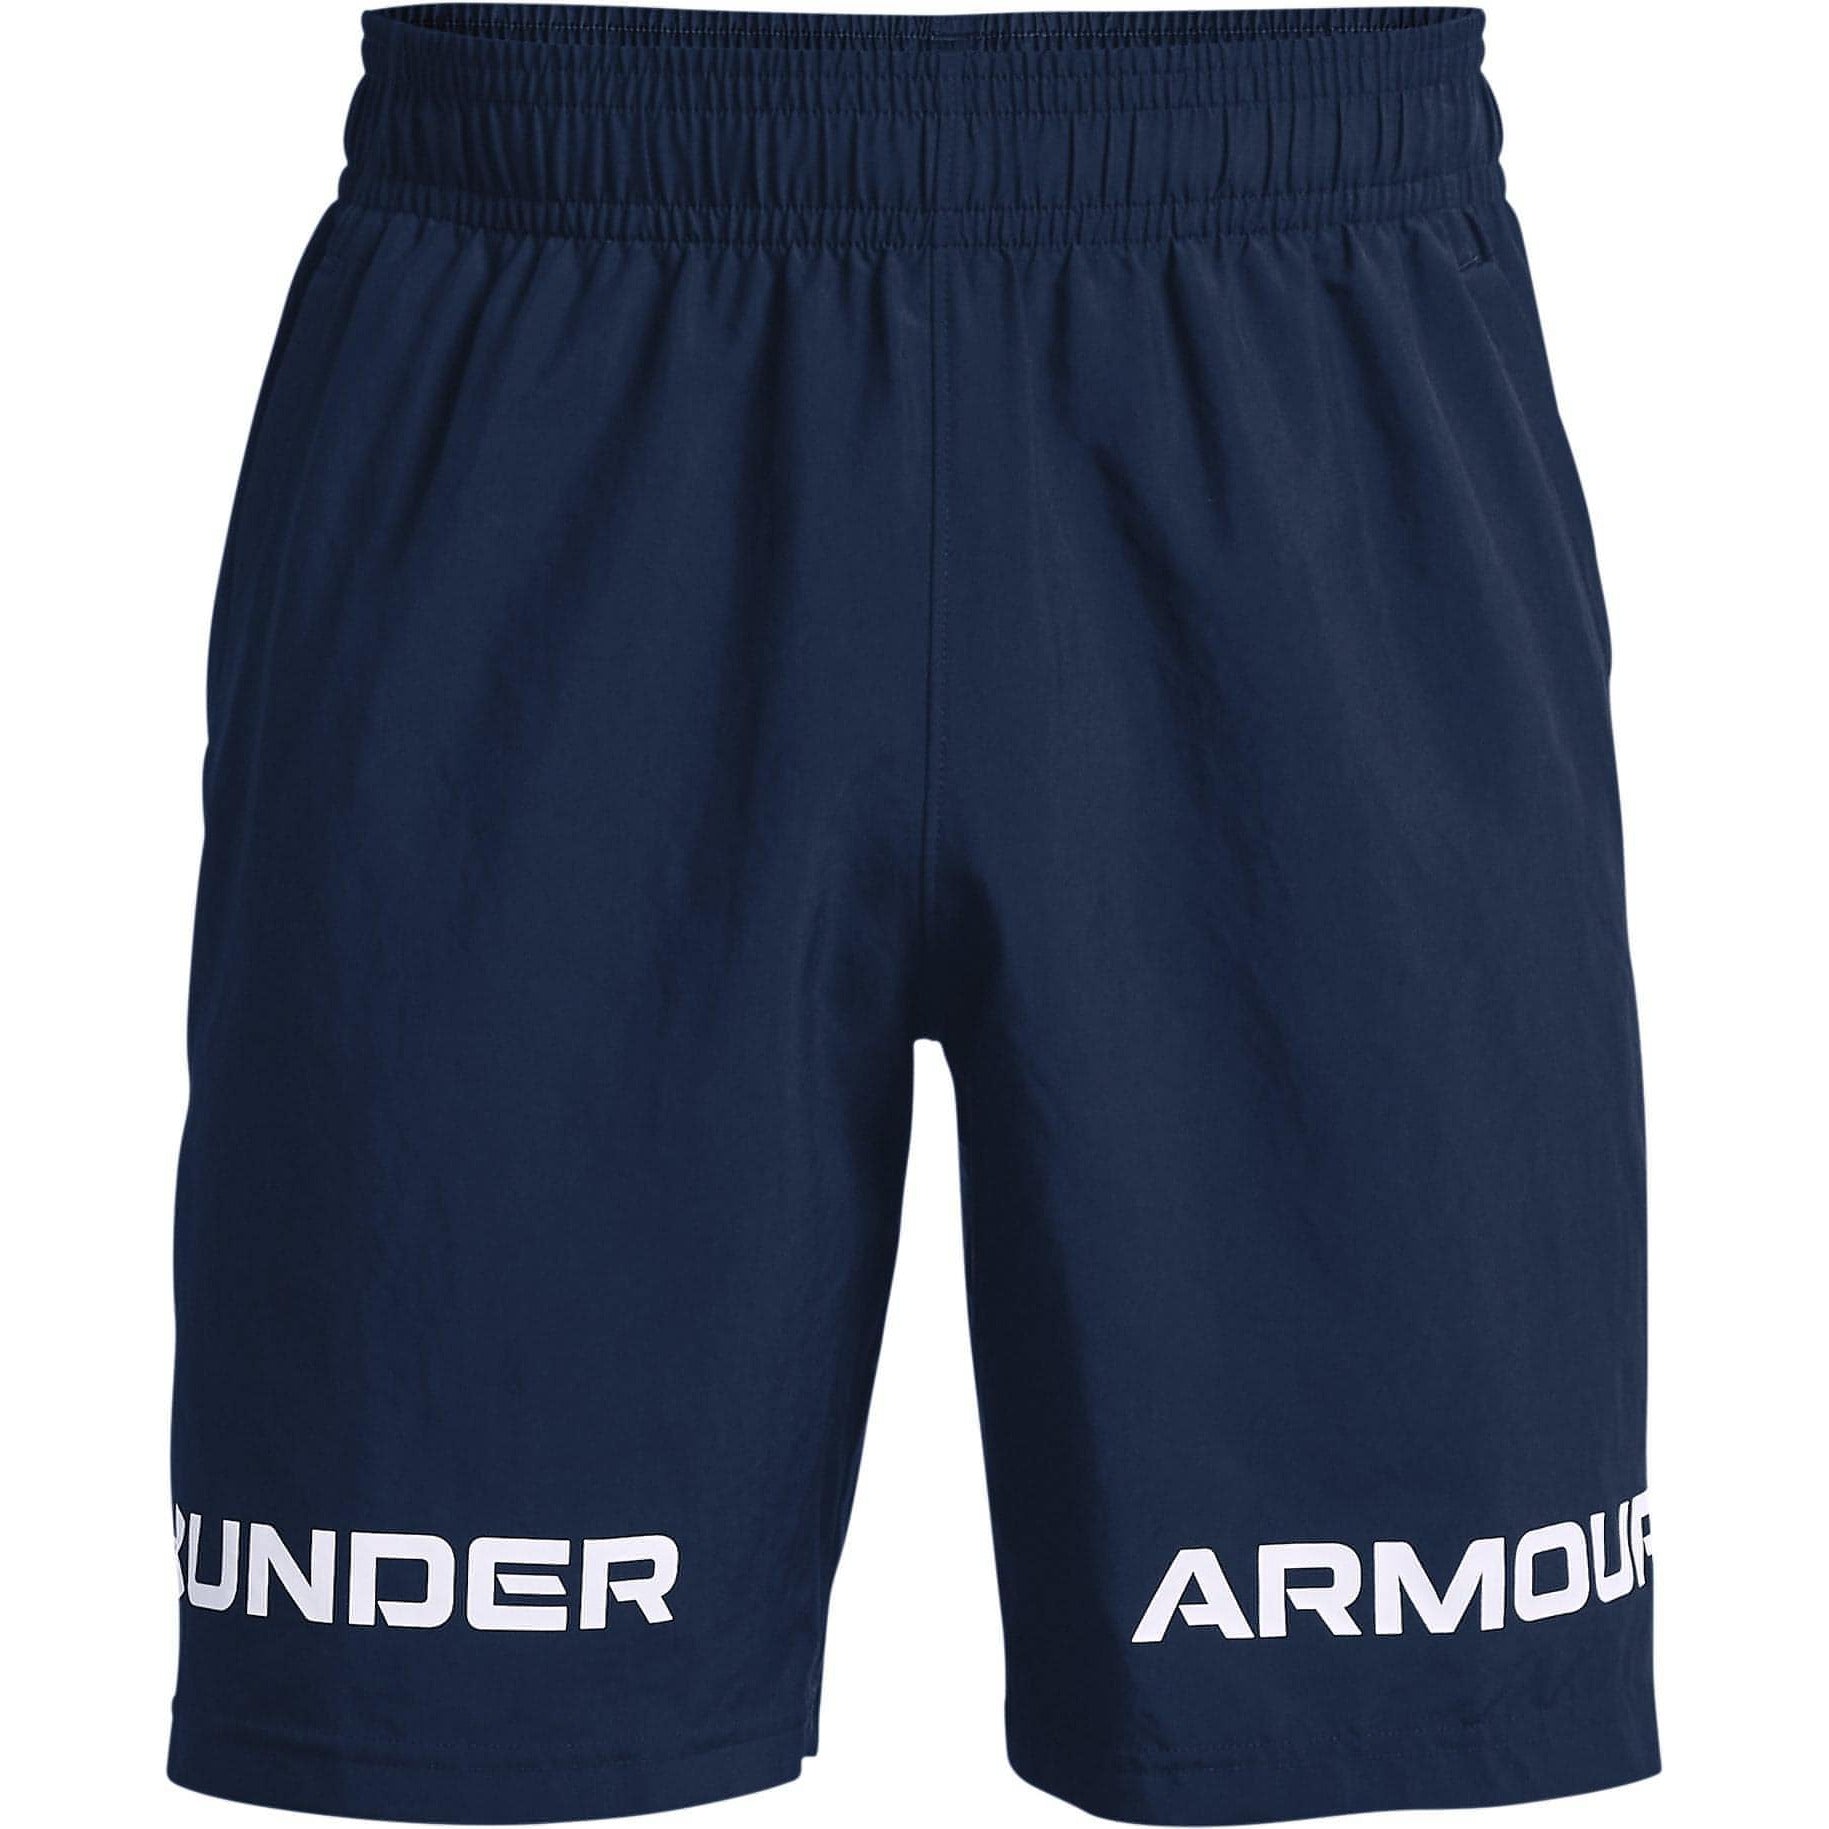 Under Armour Woven Graphic Wordmark Shorts Front - Front View